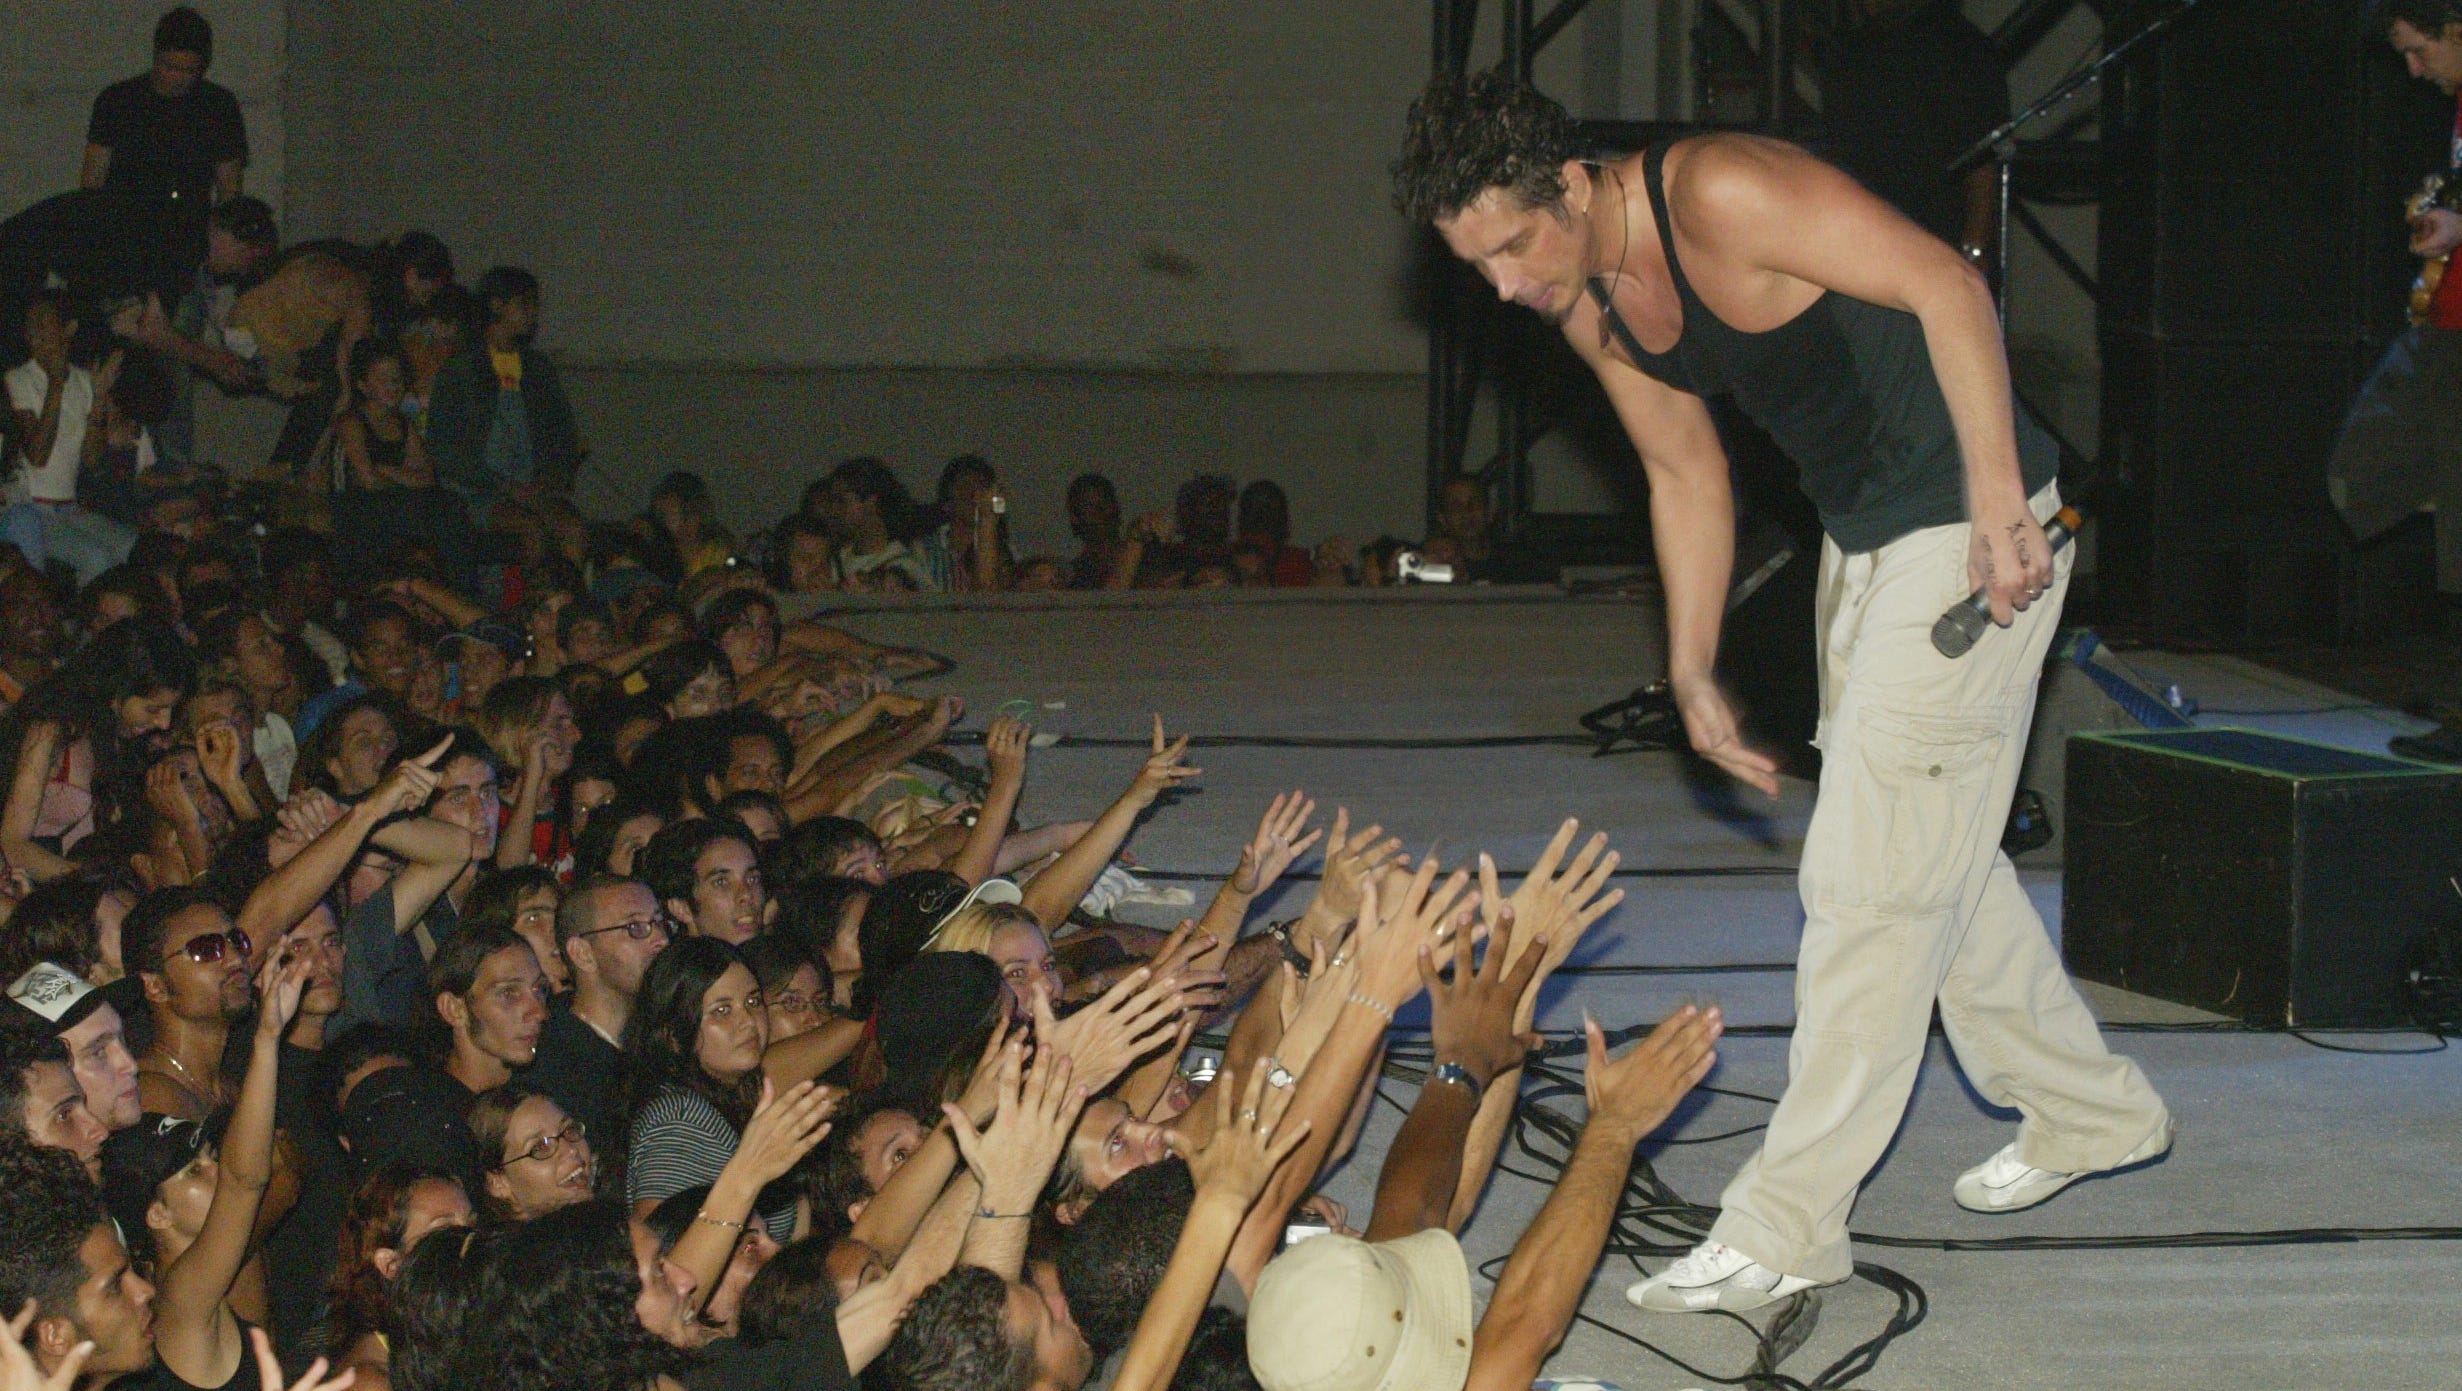 Chris Cornell interacts with the audience during an Audioslave performance in Havana, Cuba, May 6, 2005. AudioSlave gave what was billed as Cuba's first outdoor rock concert by a U.S. band since 1959.